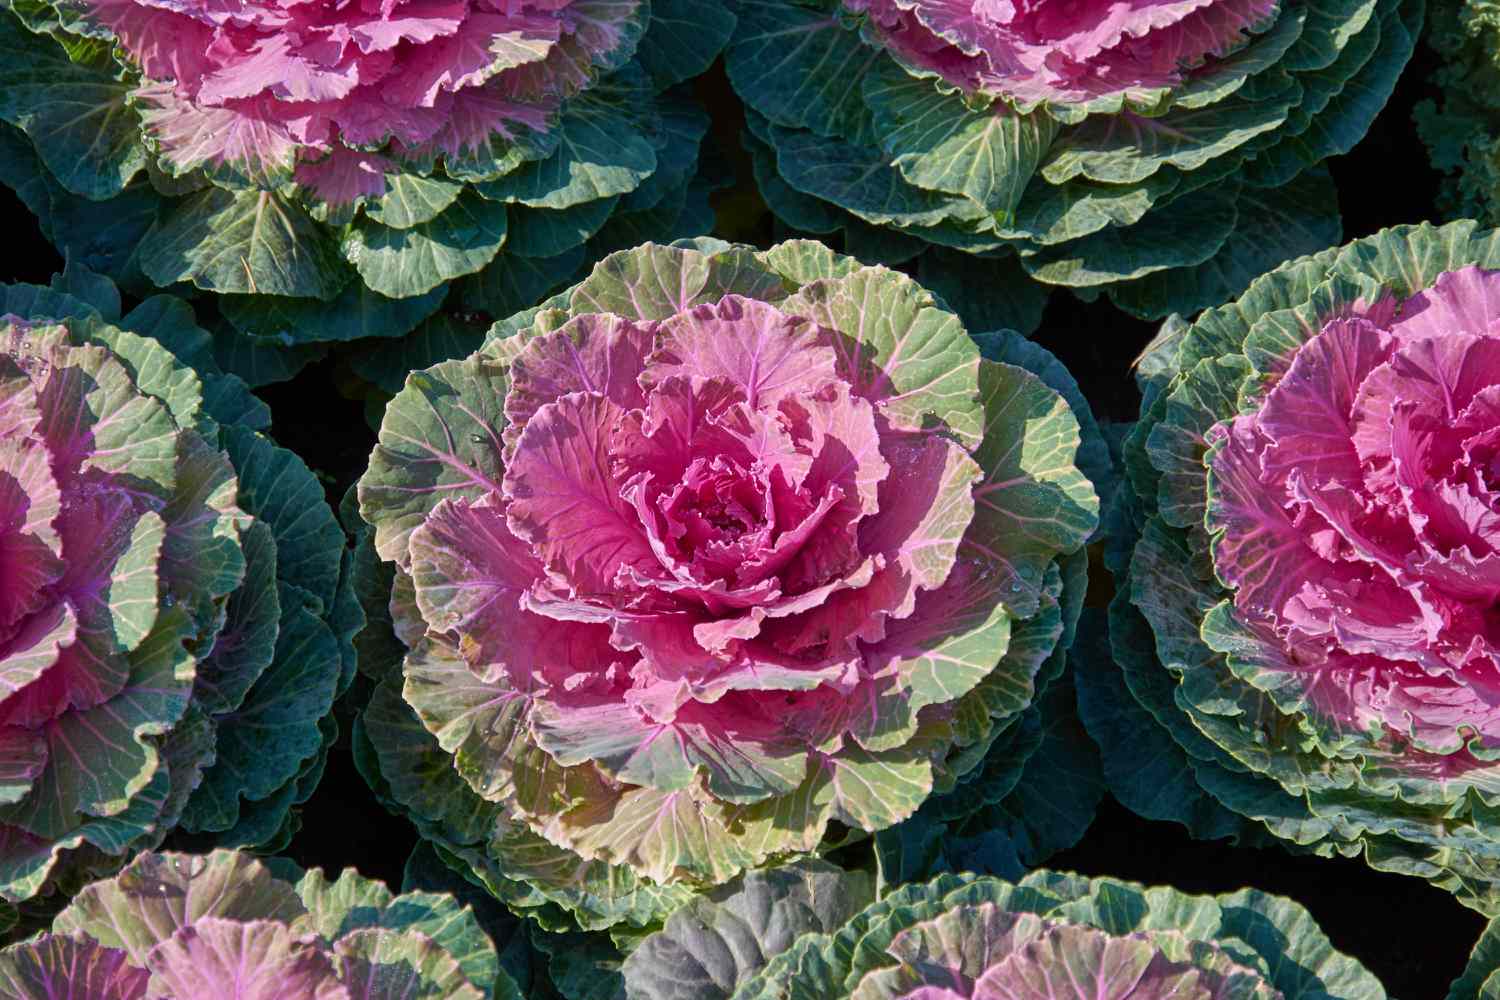 'Pigeon Red' ornamental cabbage with magenta centers